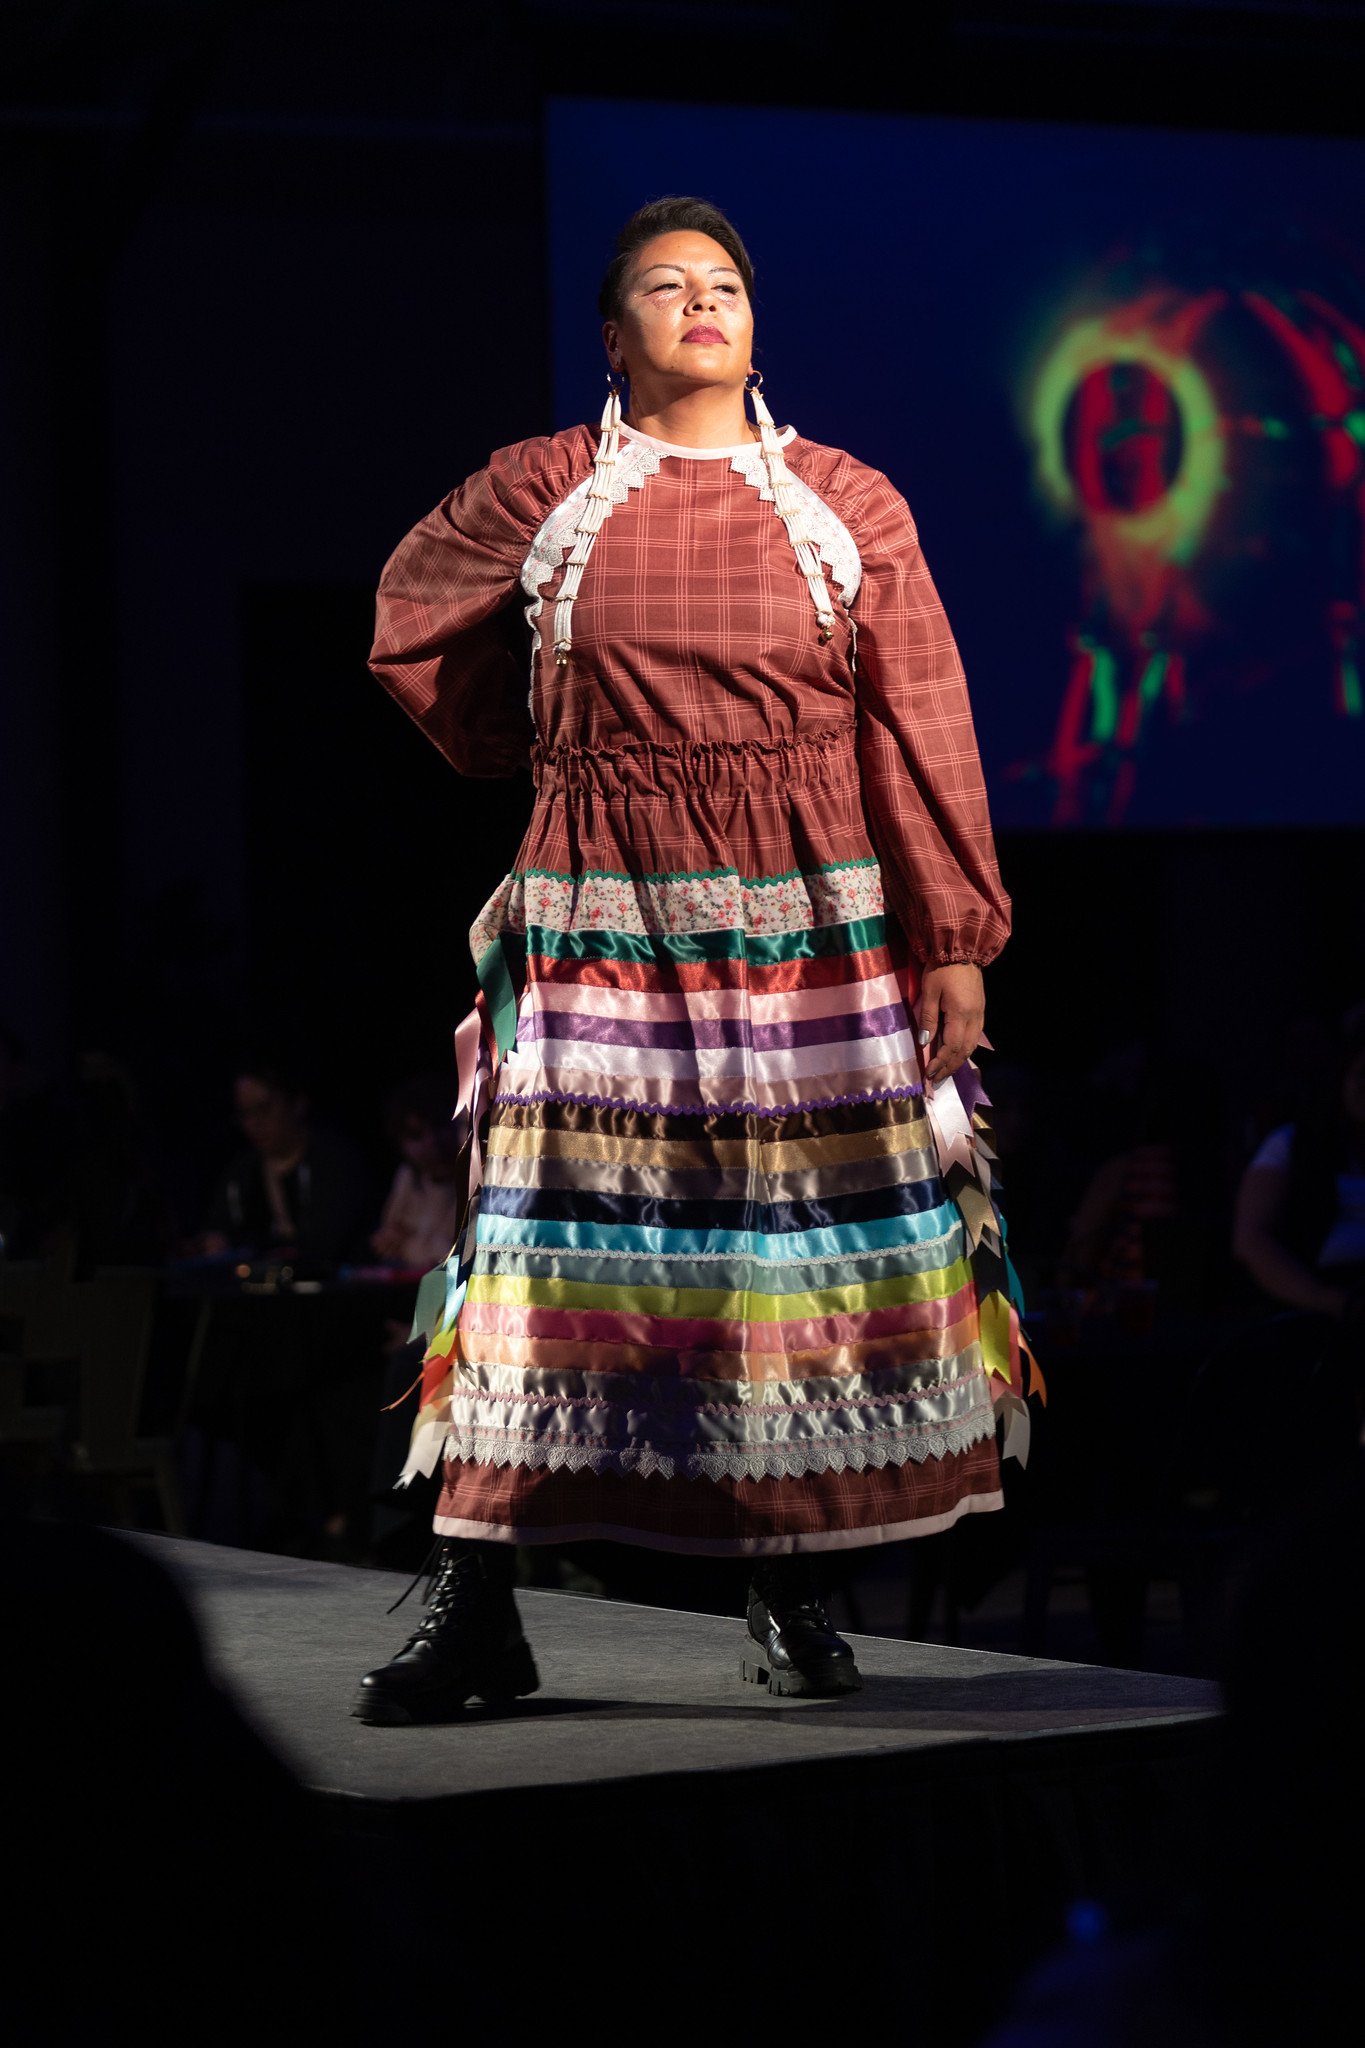 A model on the runway at Native Nations Fashion Night in Minneapolis